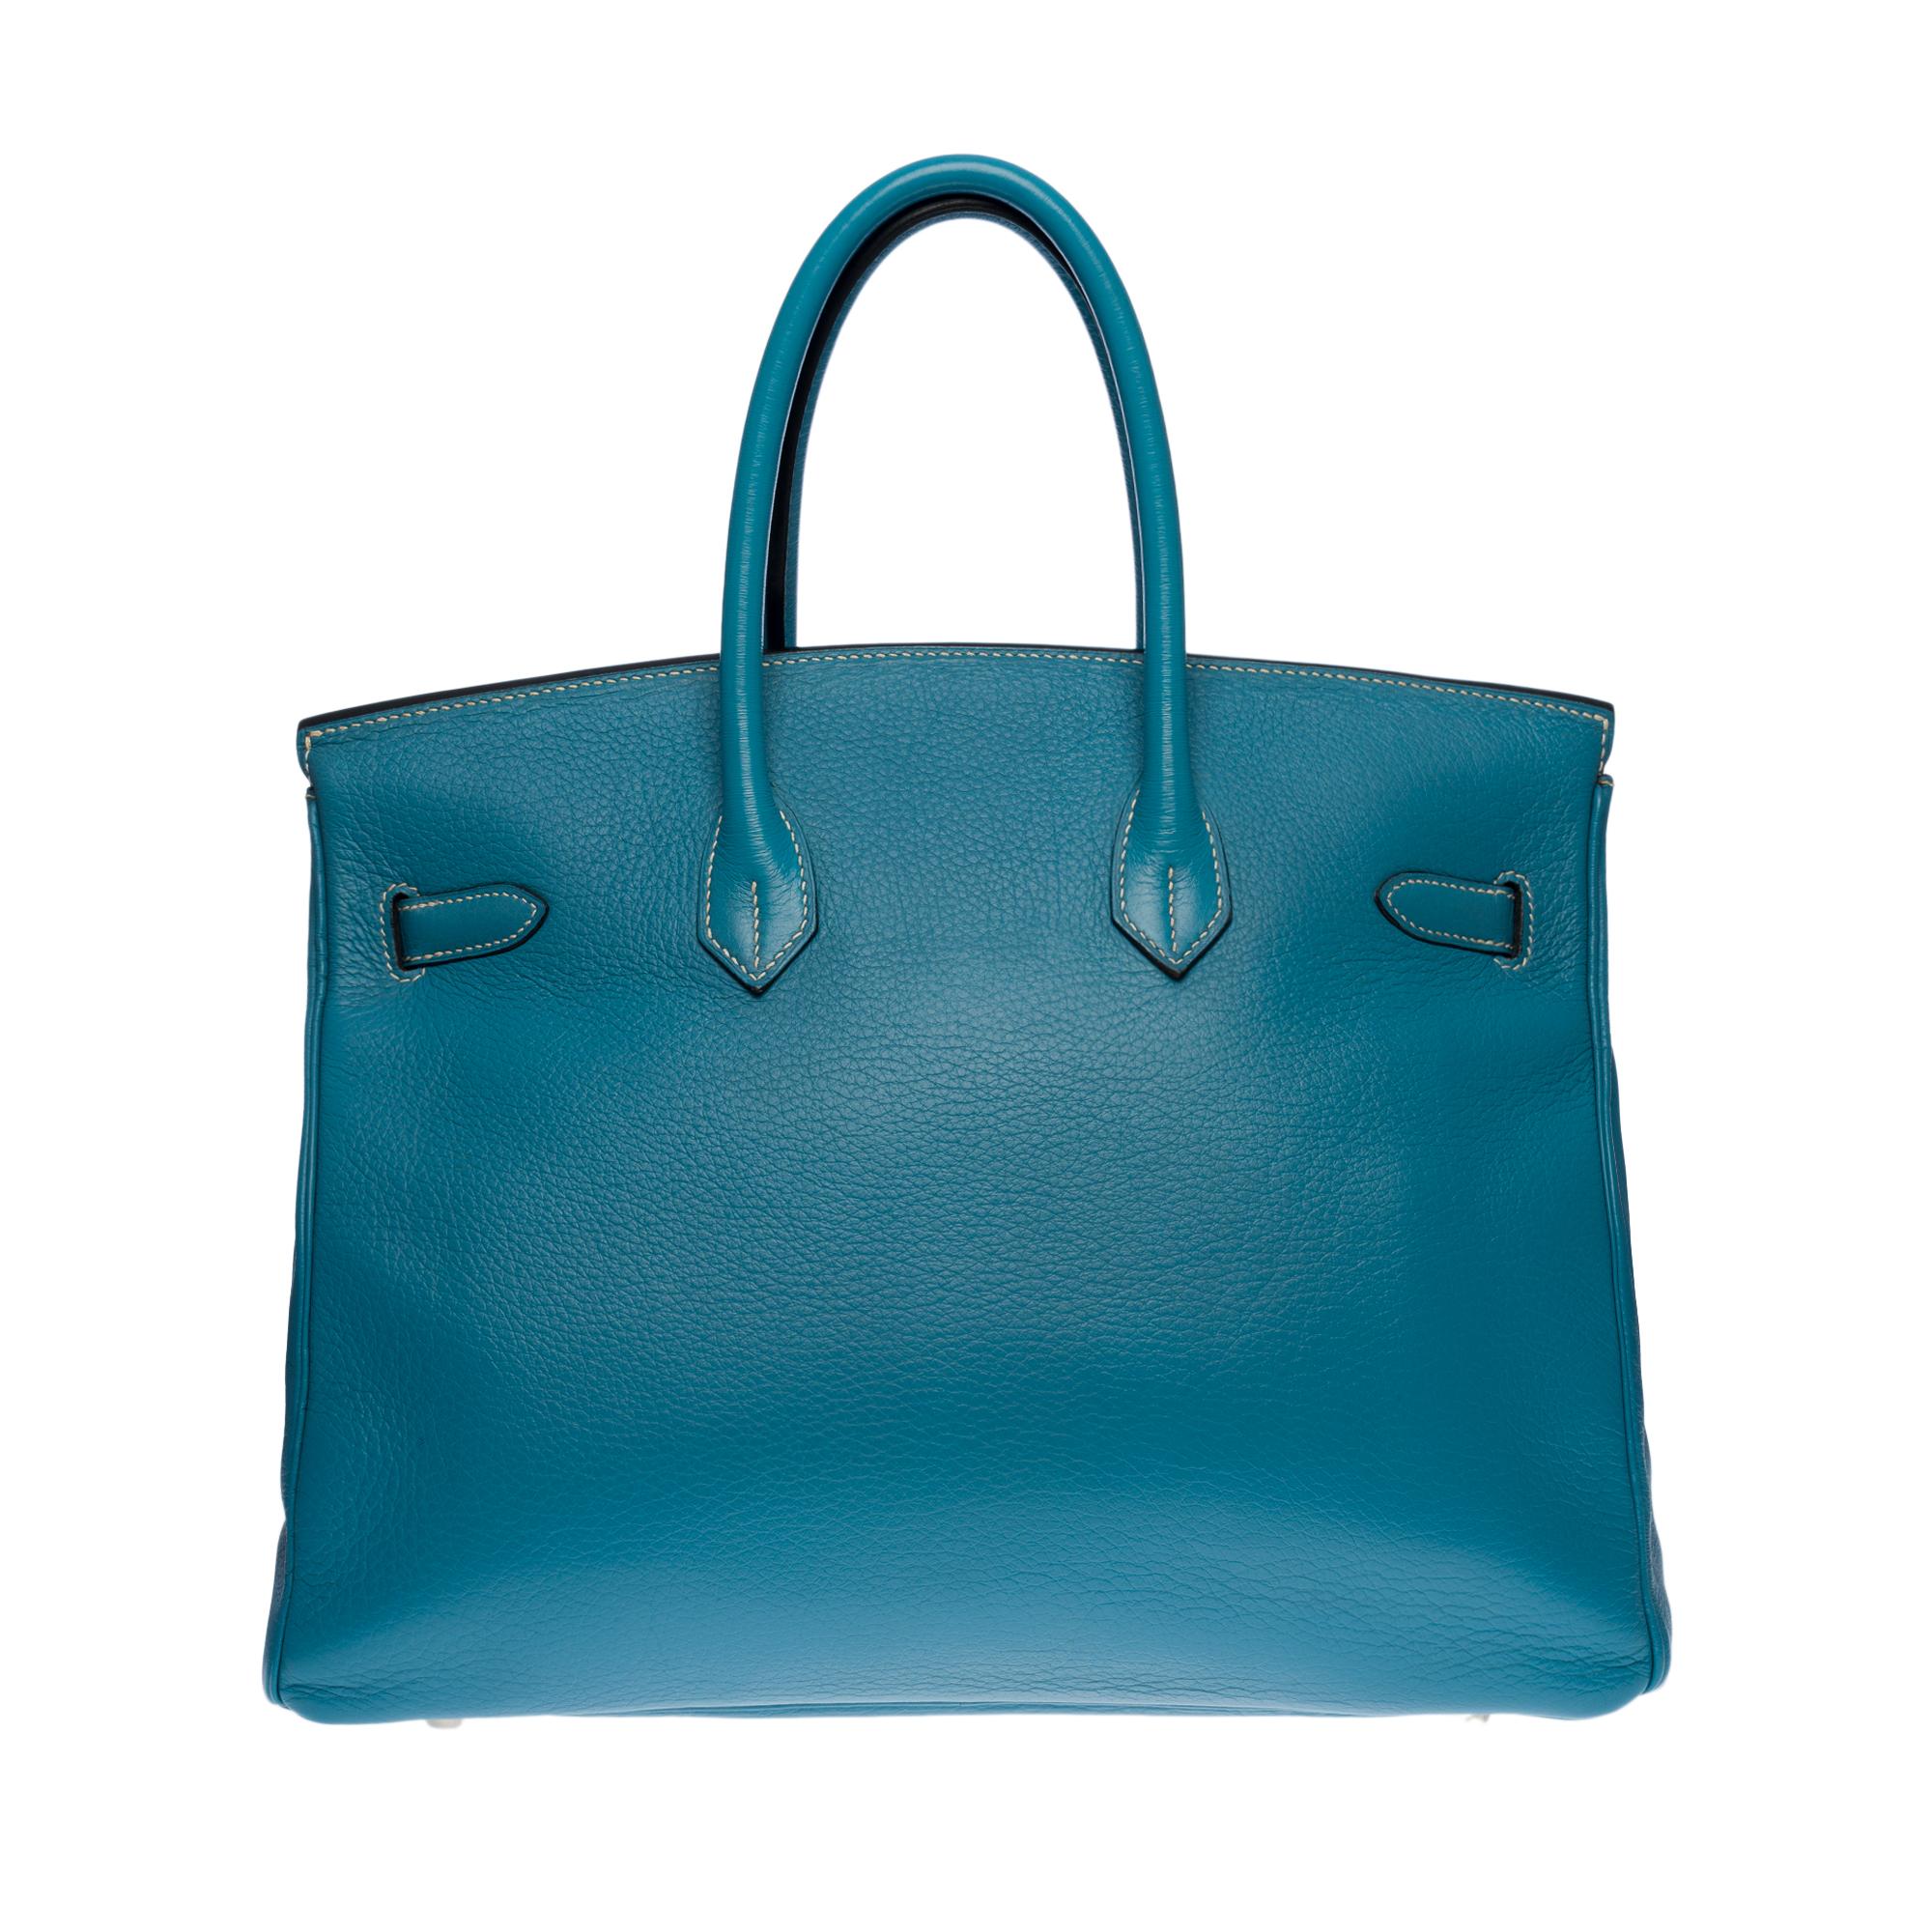 Amazing Hermes Birkin 35 handbag in Togo Blue Jeans Togo leather with white stitching, Palladium silver metal hardware, double blue leather handle for a hand carry

Flap closure
Inner lining in blue leather, one zippered pocket, one patch